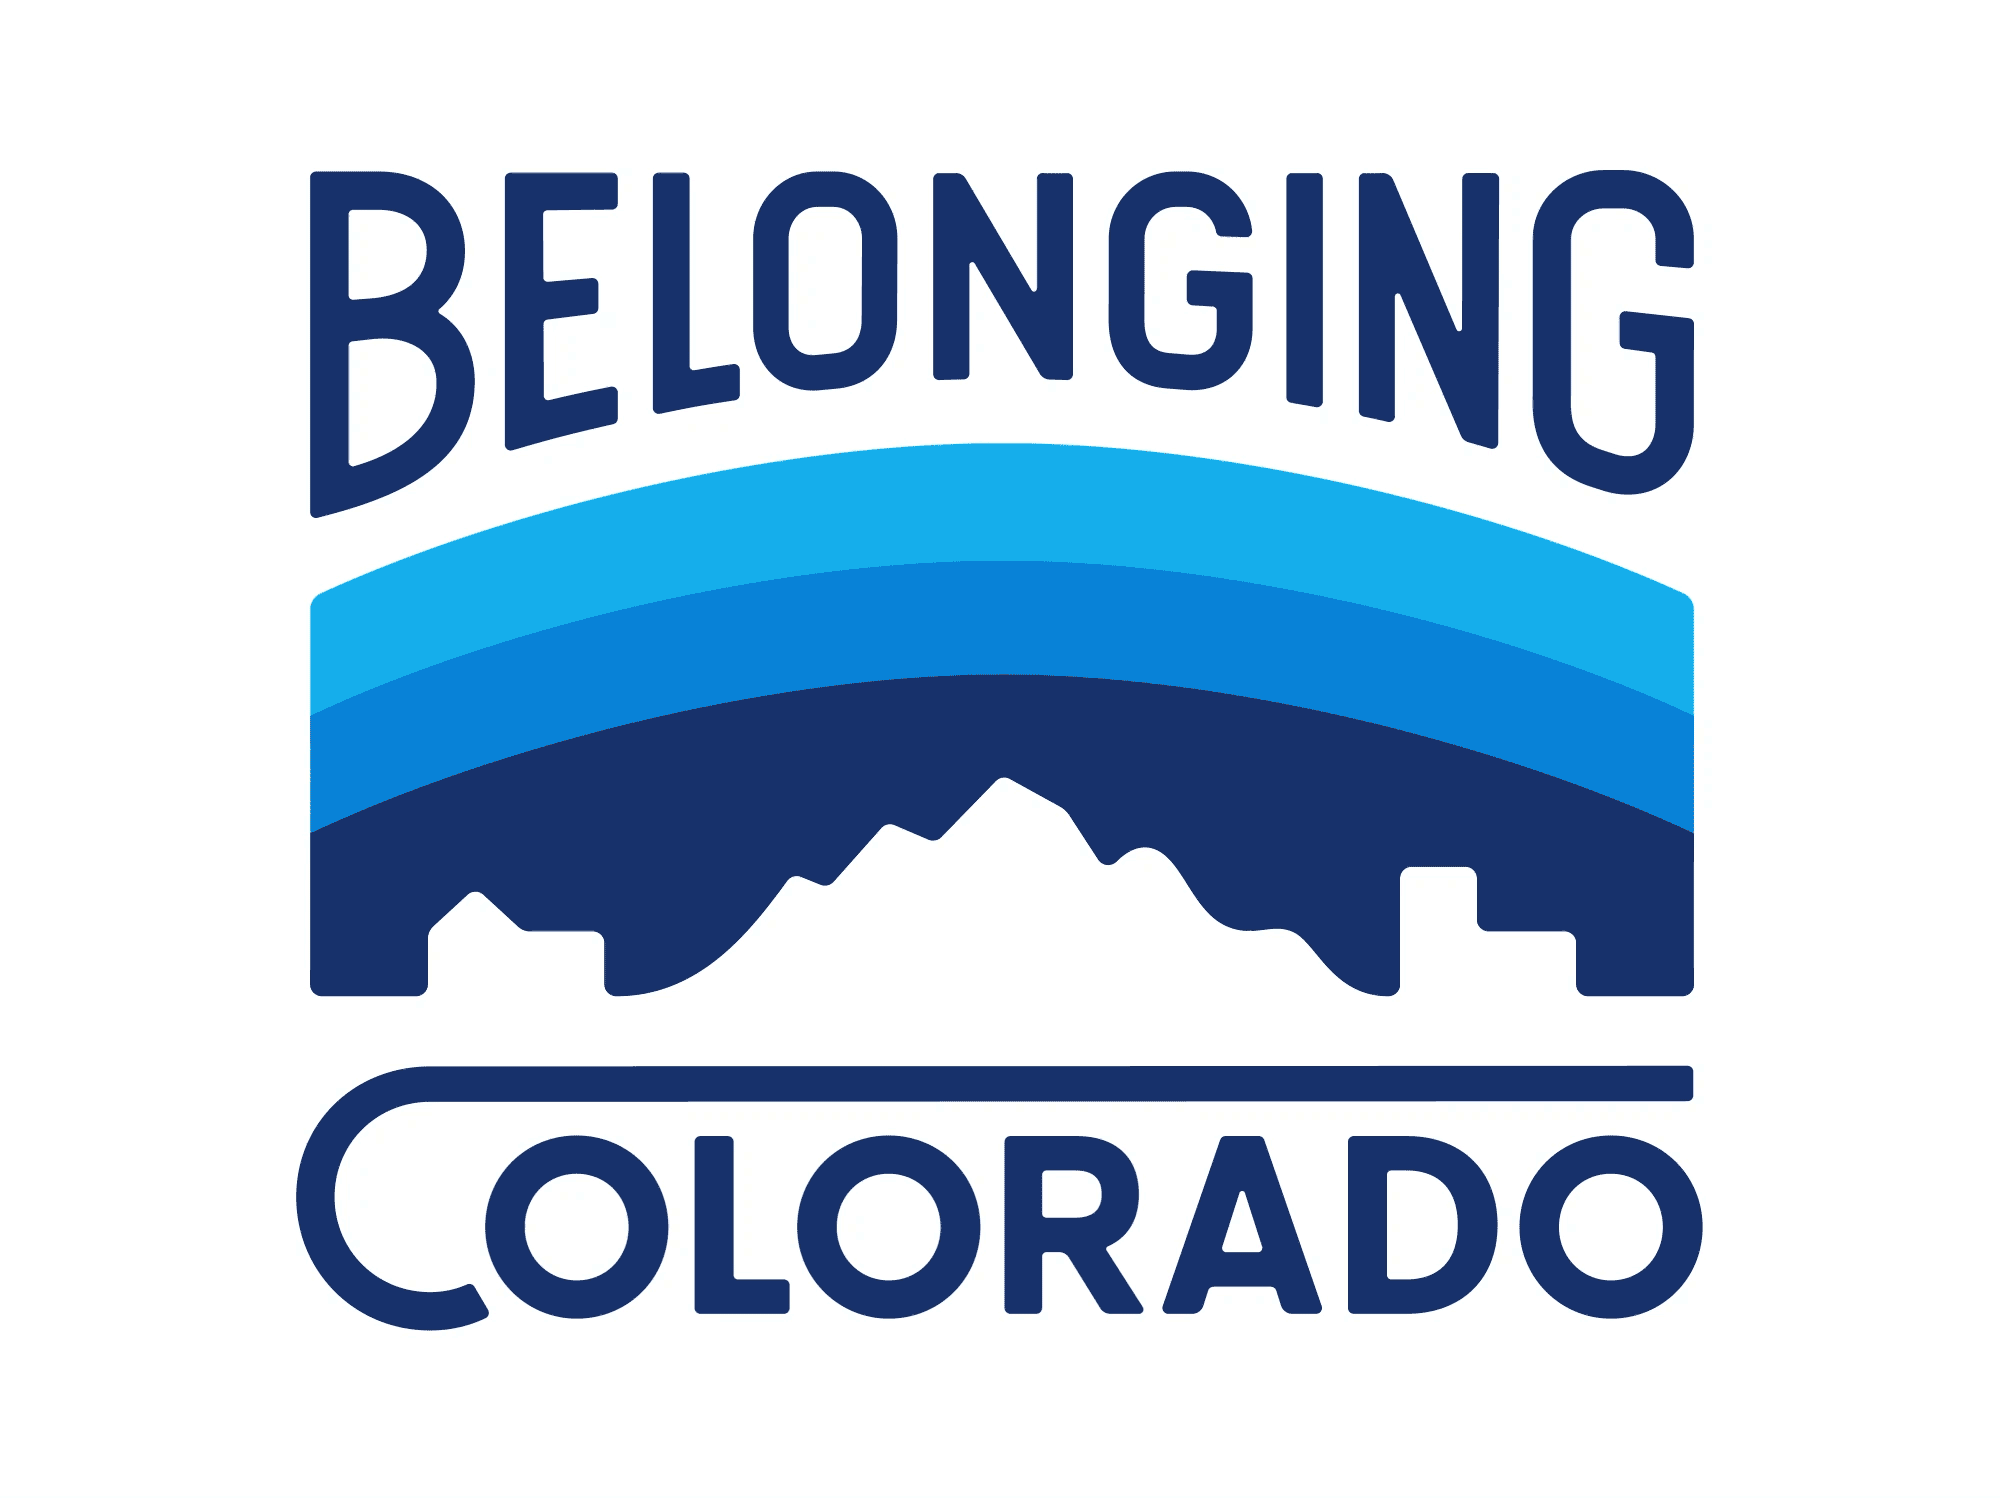 Logo with the words 'belonging colorado' with a mountain and city scene